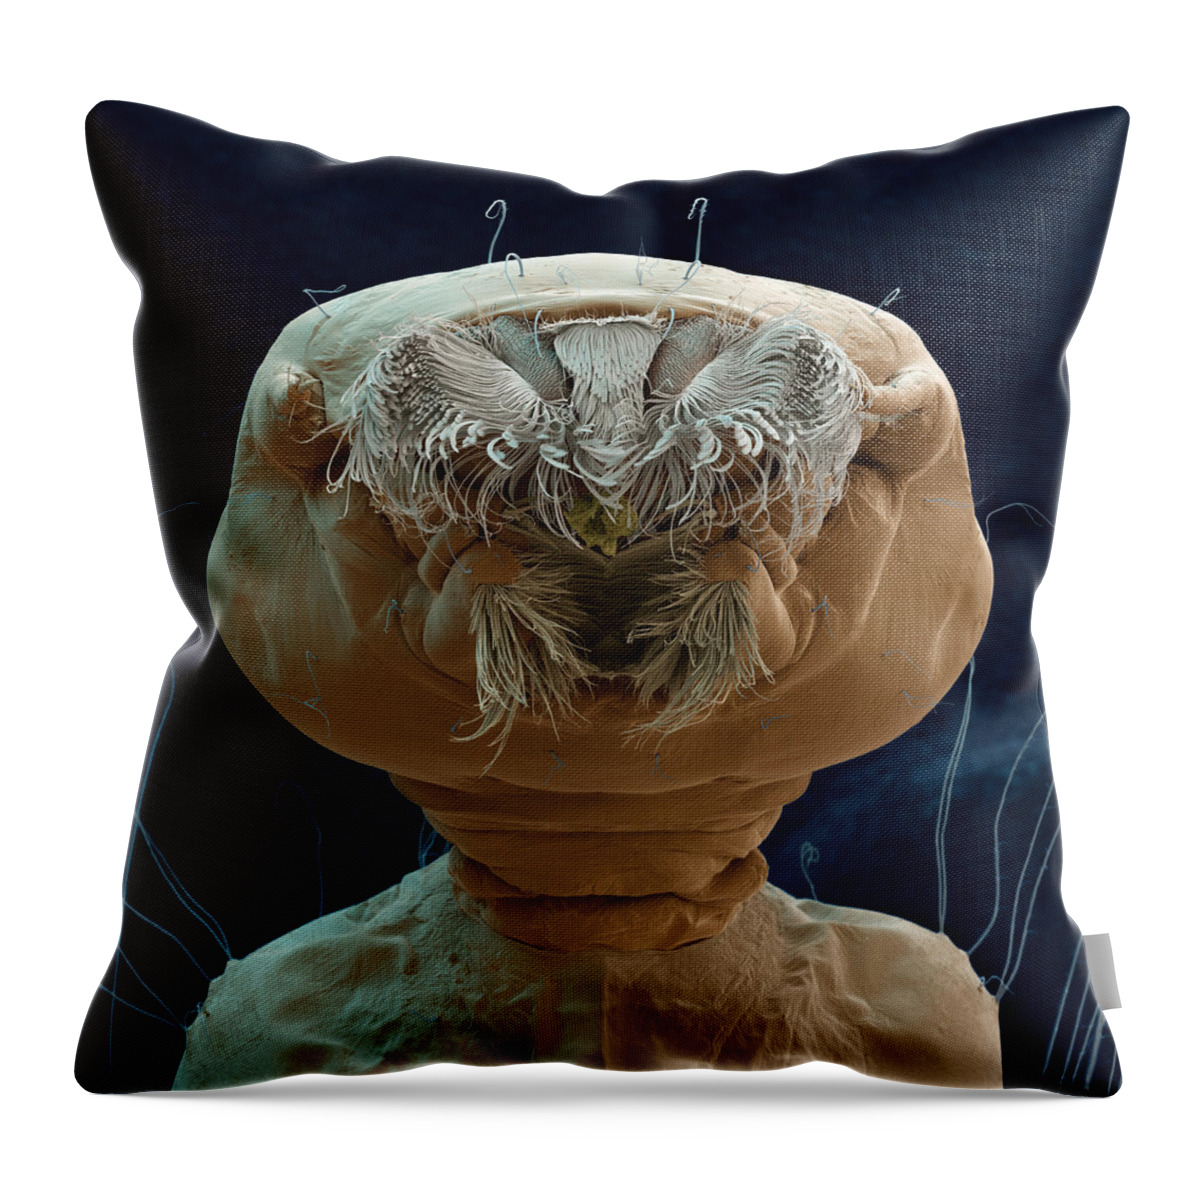 Aedes Aegypti Throw Pillow featuring the photograph Yellow Fever Mosquito, Aedes Aegypti by Meckes/ottawa